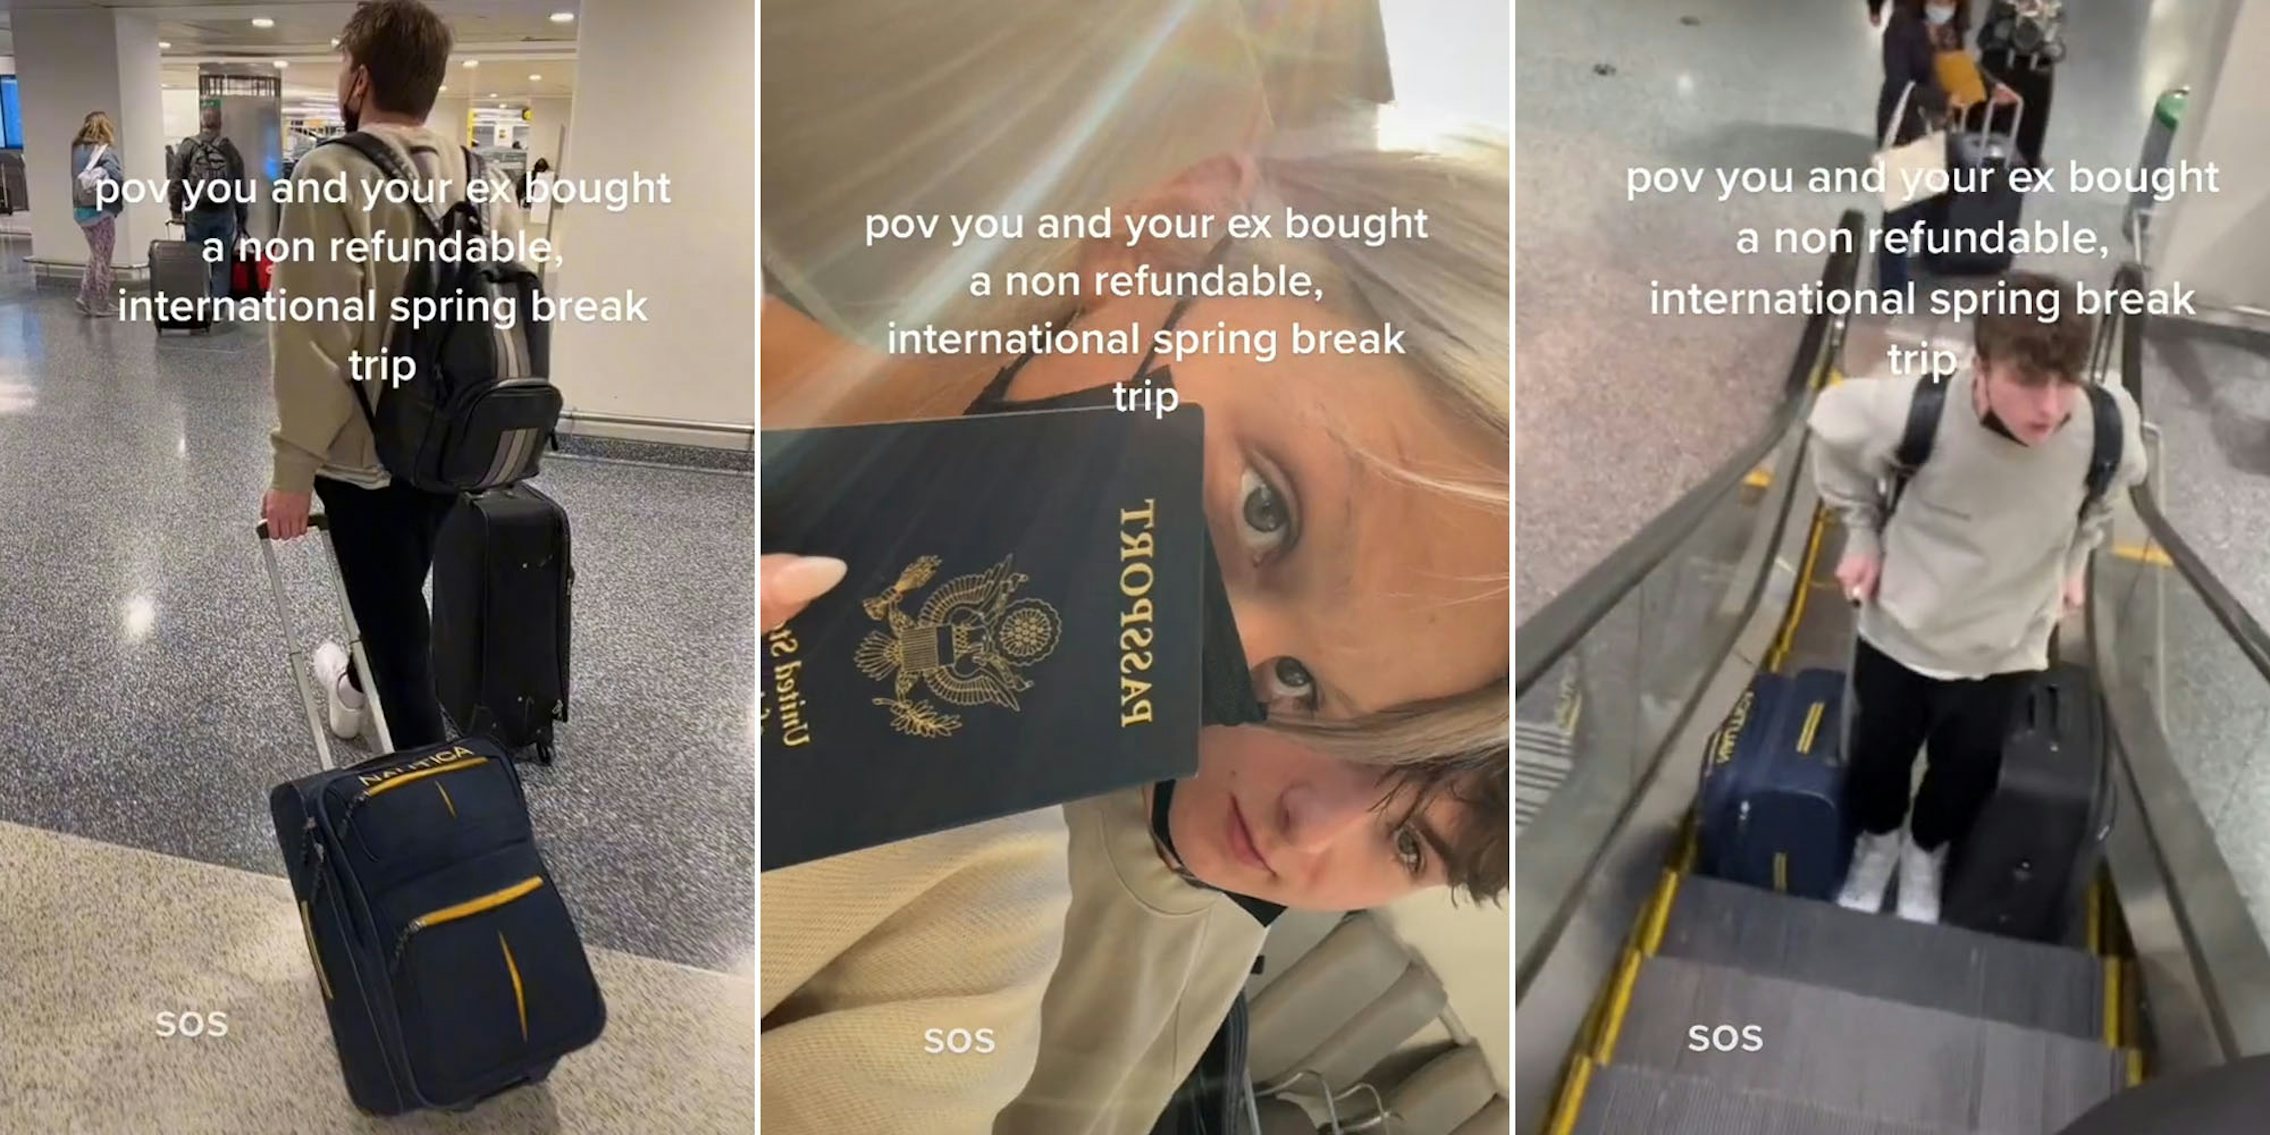 Man in airport with luggage caption ' pov you and your ex bought a non refundable international spring break trip' 'SOS'(l) Woman and her ex boyfriend holding passport caption ' pov you and your ex bought a non refundable international spring break trip' 'SOS' (c) Man on escalator with luggage caption ' pov you and your ex bought a non refundable international spring break trip' 'SOS' (r)